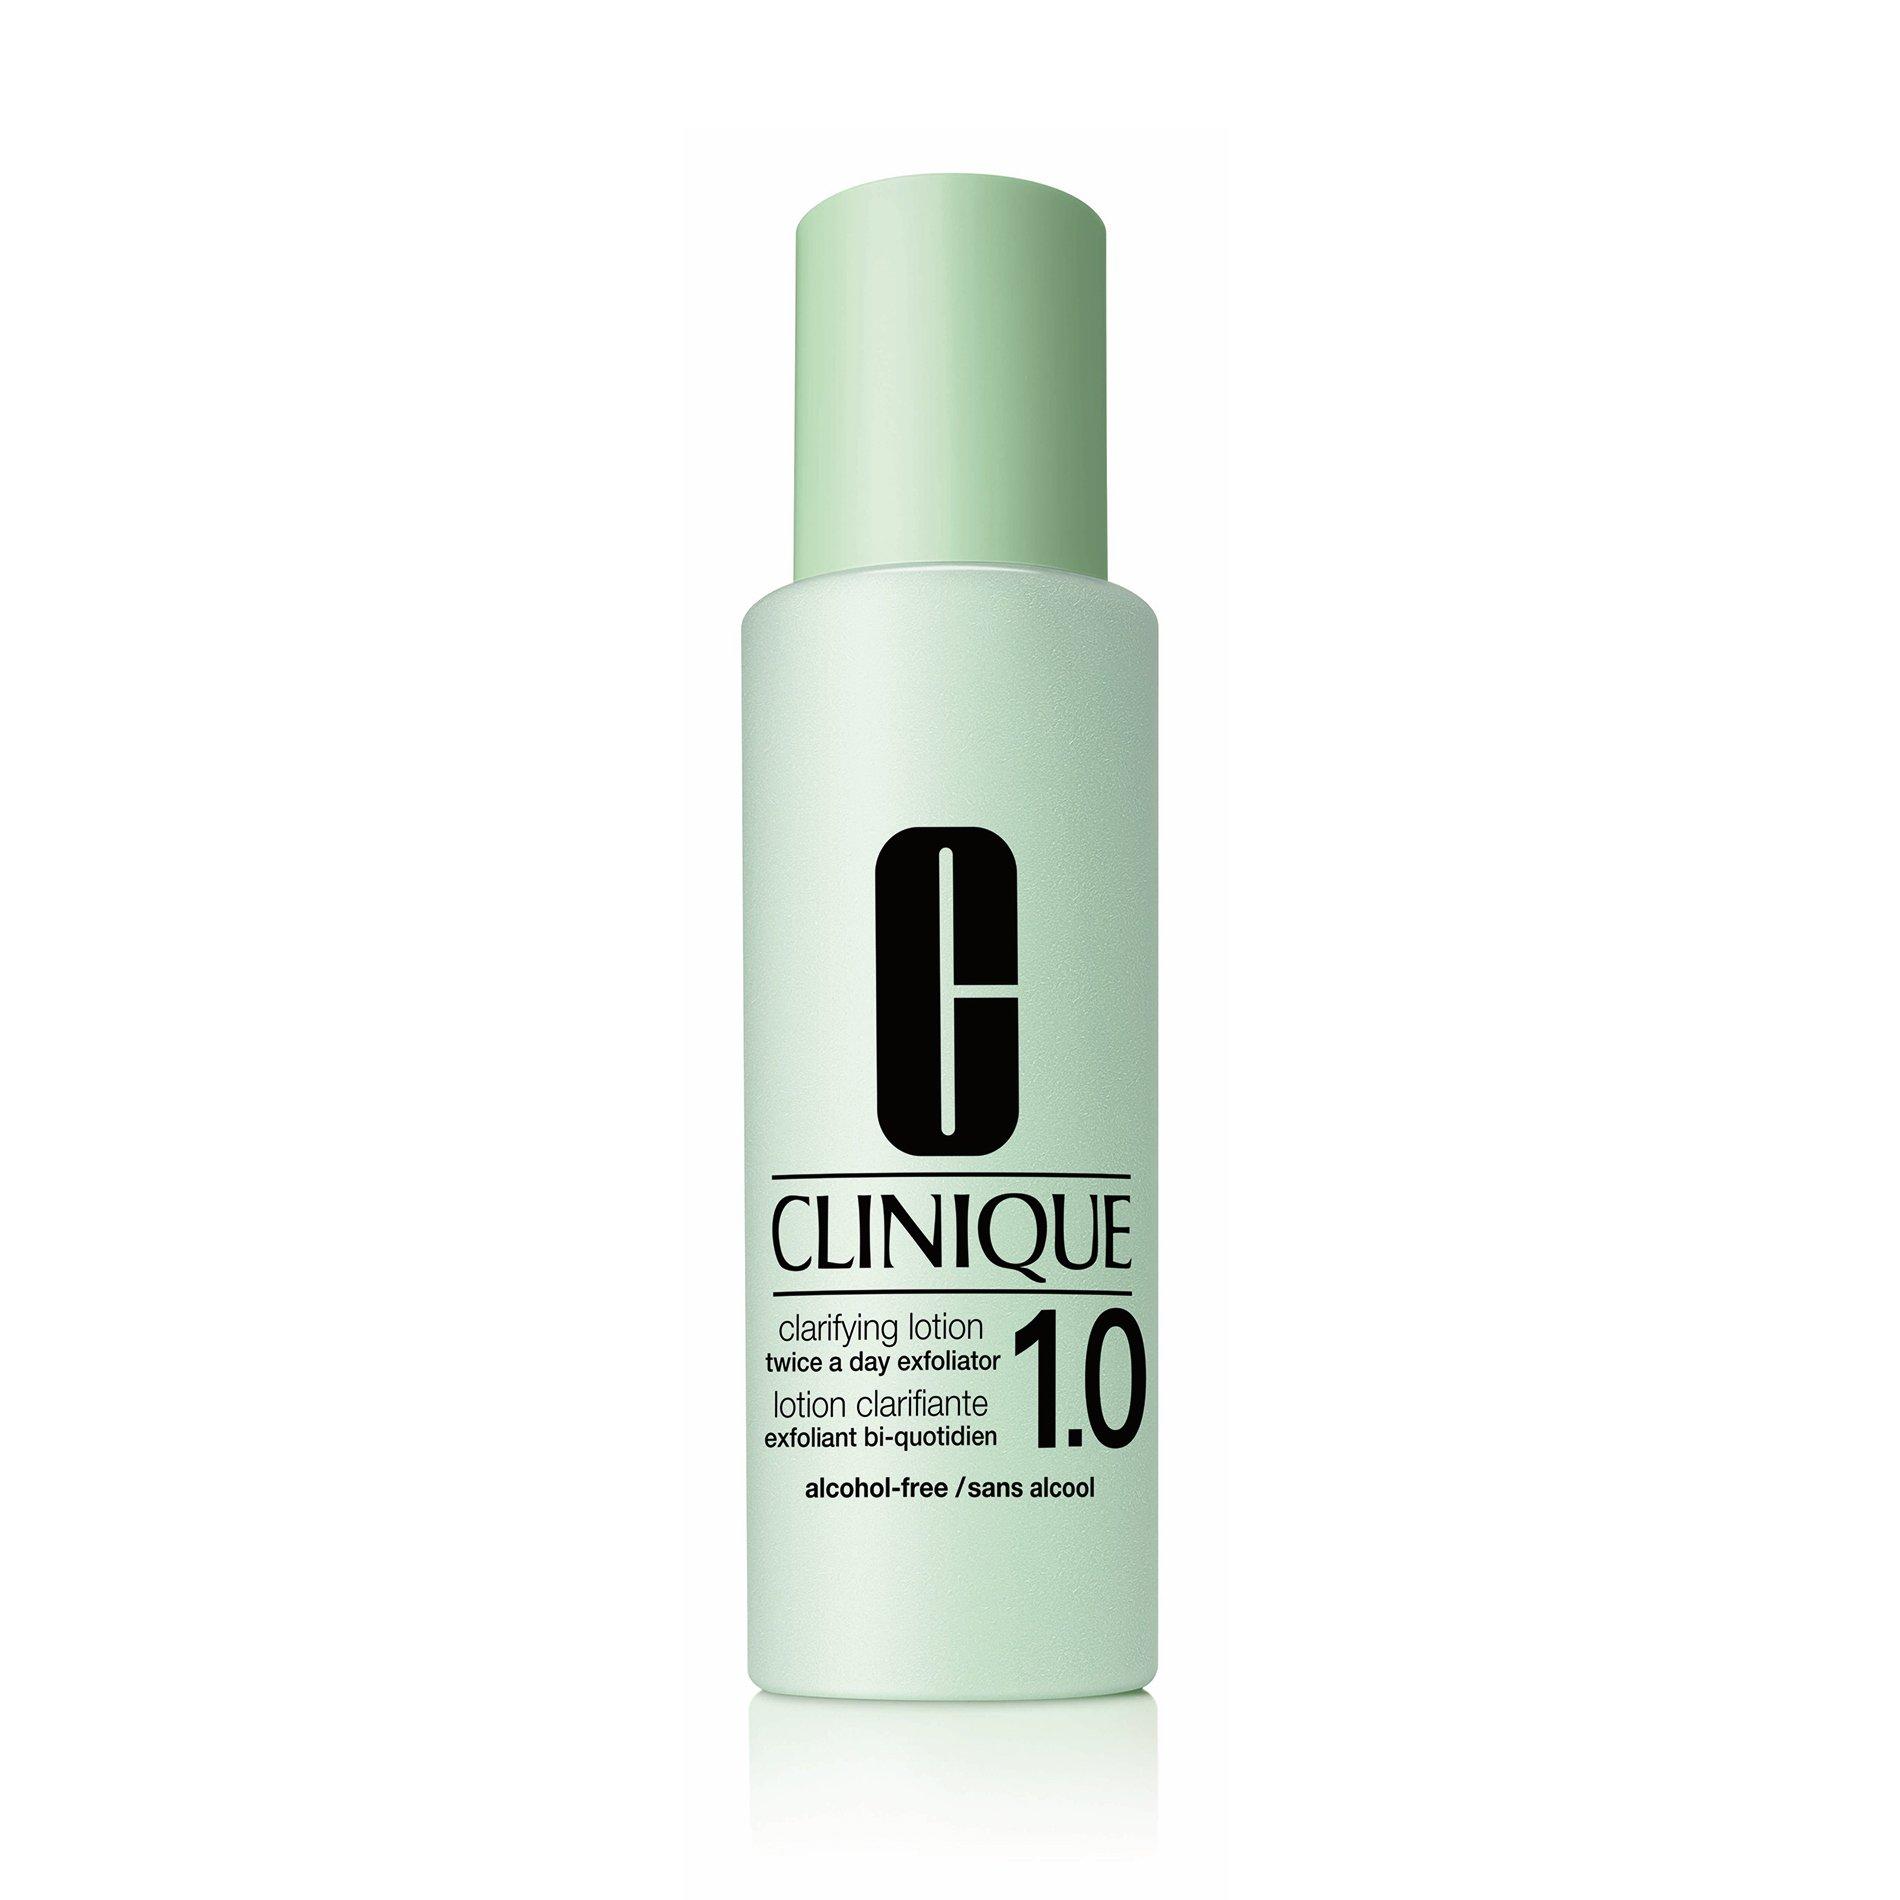 Image of CLINIQUE Clarifying Lotion 1.0 - 400ml